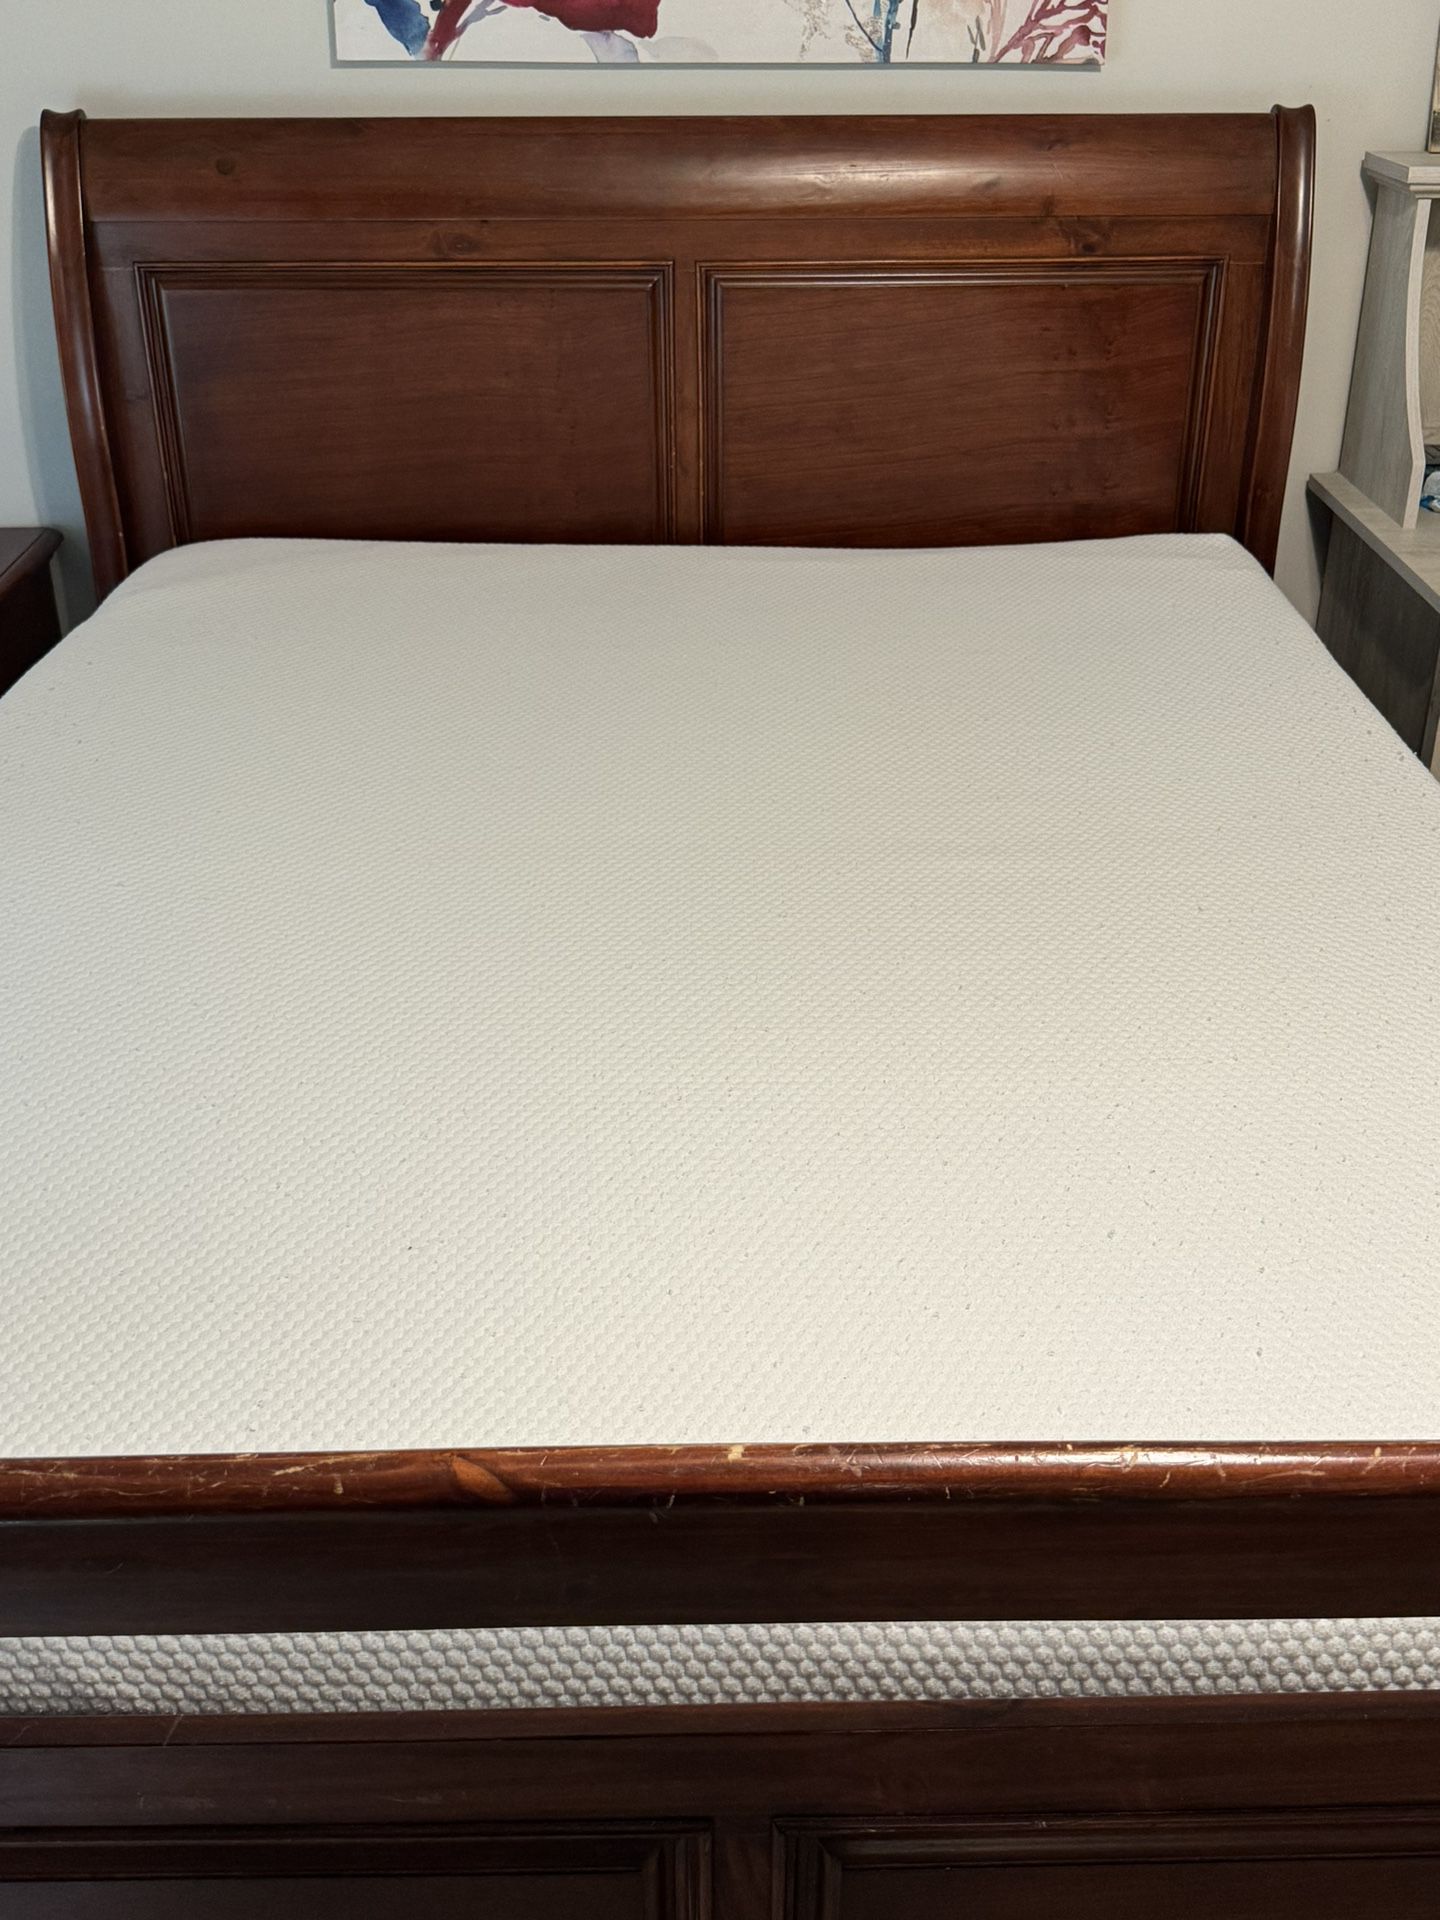 Queen Mattress And Boxspring